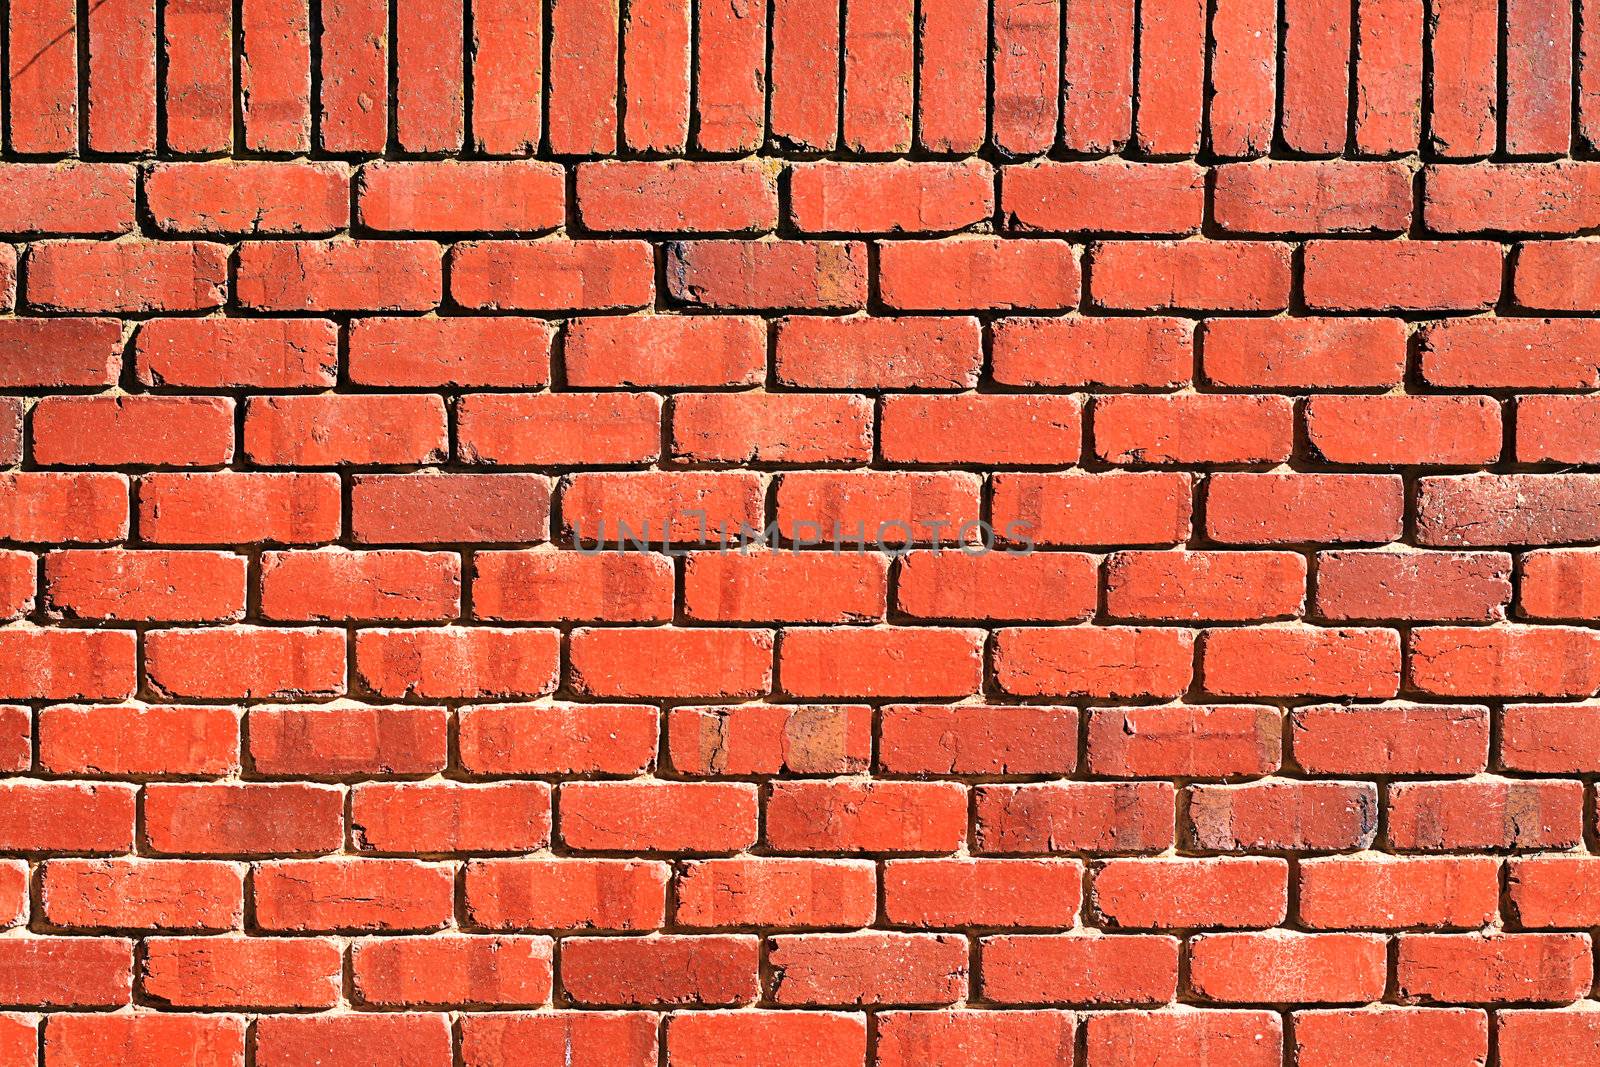 Background Texture: Red Brick Wall with Perpendicular Top Row by Cloudia